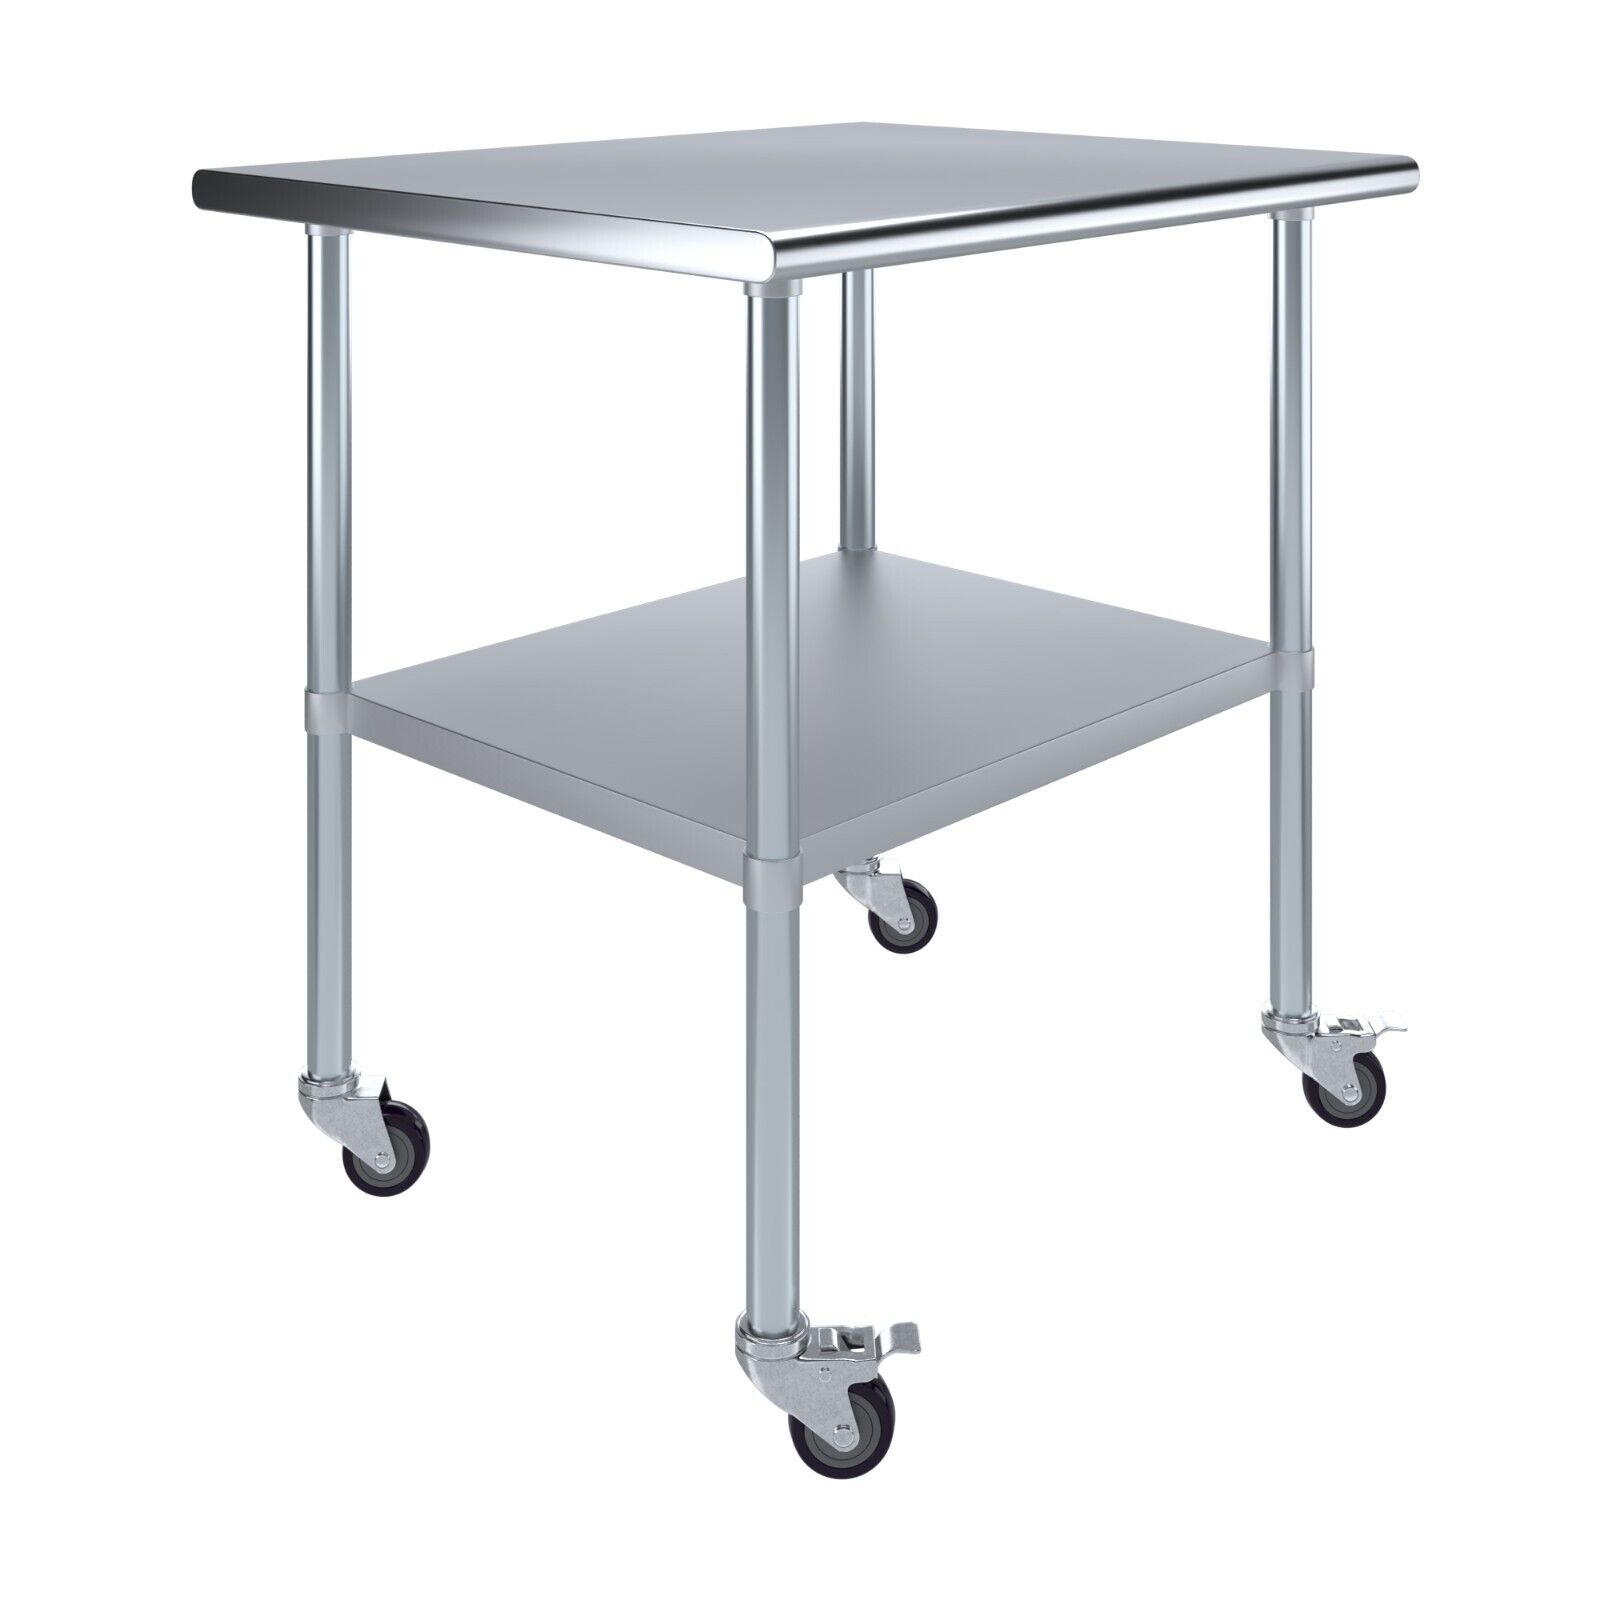 30 in. x 36 in. Stainless Steel Work Table with Wheels | Metal Mobile Food Prep